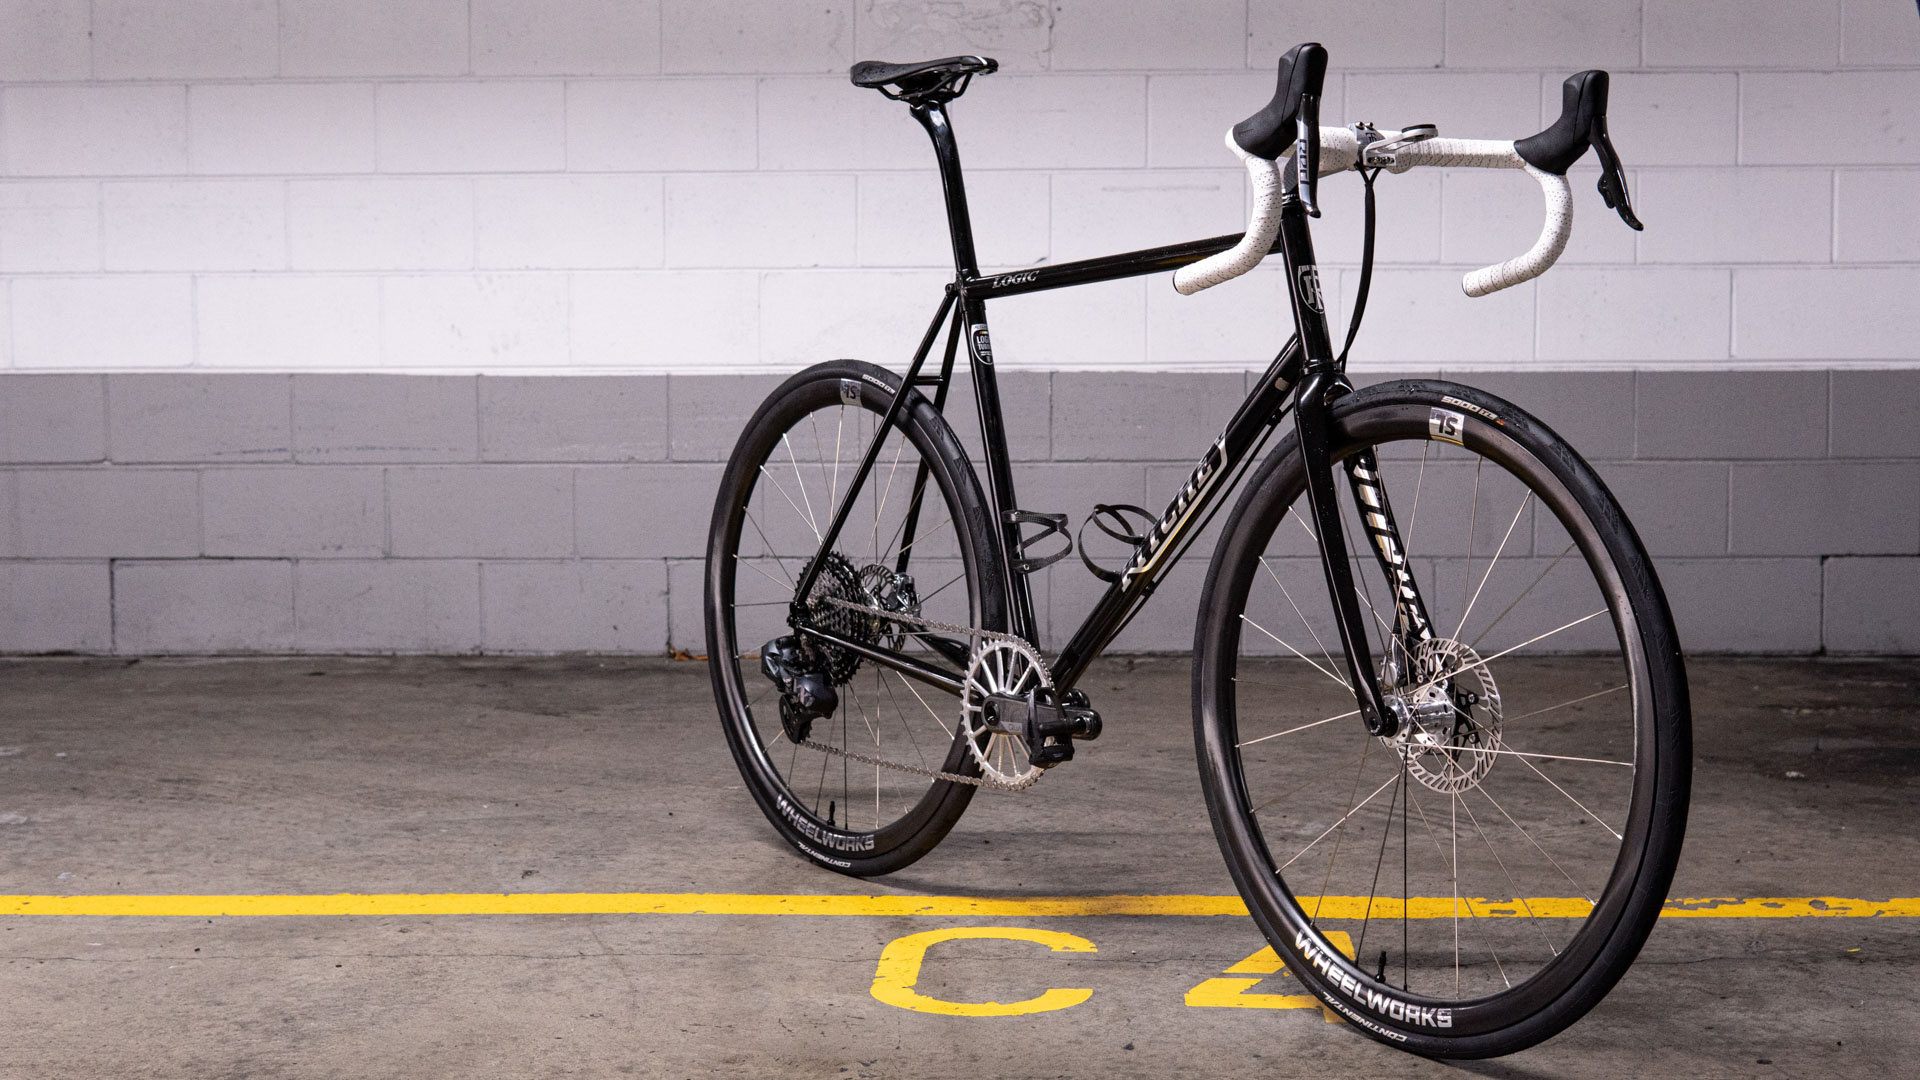 Ritchey Bicycle, Road Logic disc, Two-tone design, Cyclocross excellence, 1920x1080 Full HD Desktop